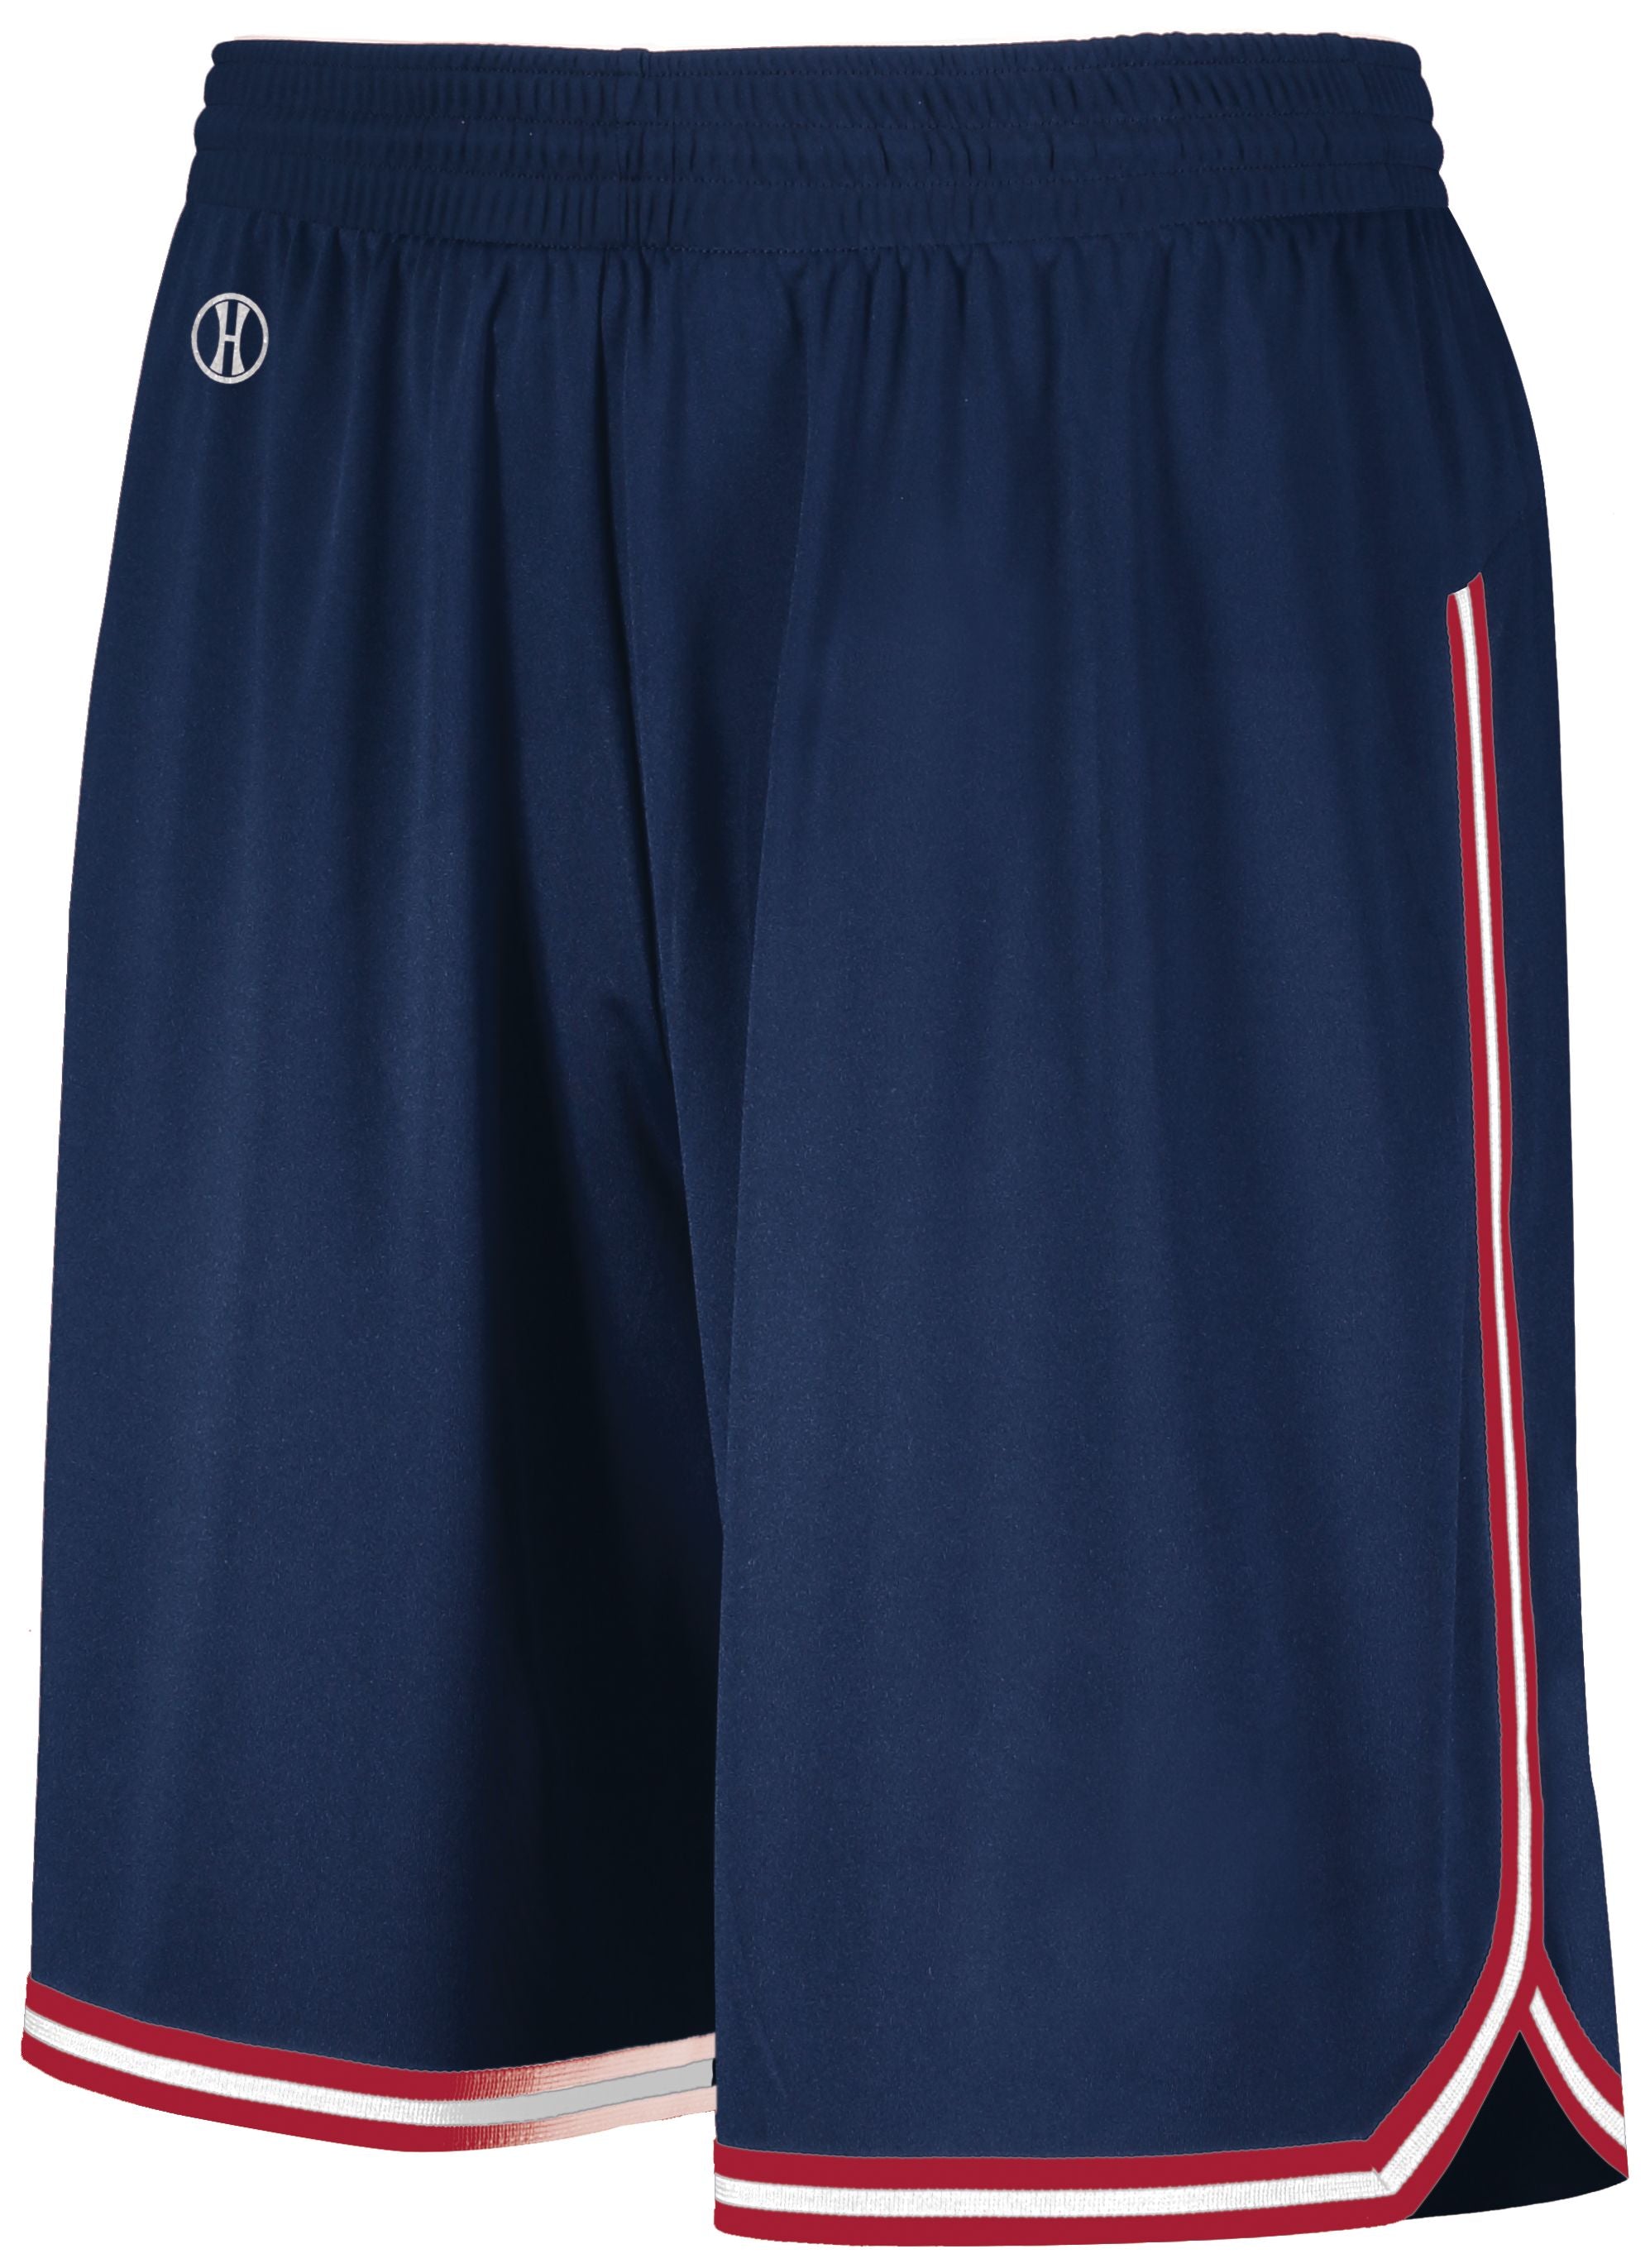 Holloway Youth Retro Basketball Shorts in Navy/Scarlet/White  -Part of the Youth, Youth-Shorts, Basketball, Holloway, All-Sports, All-Sports-1 product lines at KanaleyCreations.com